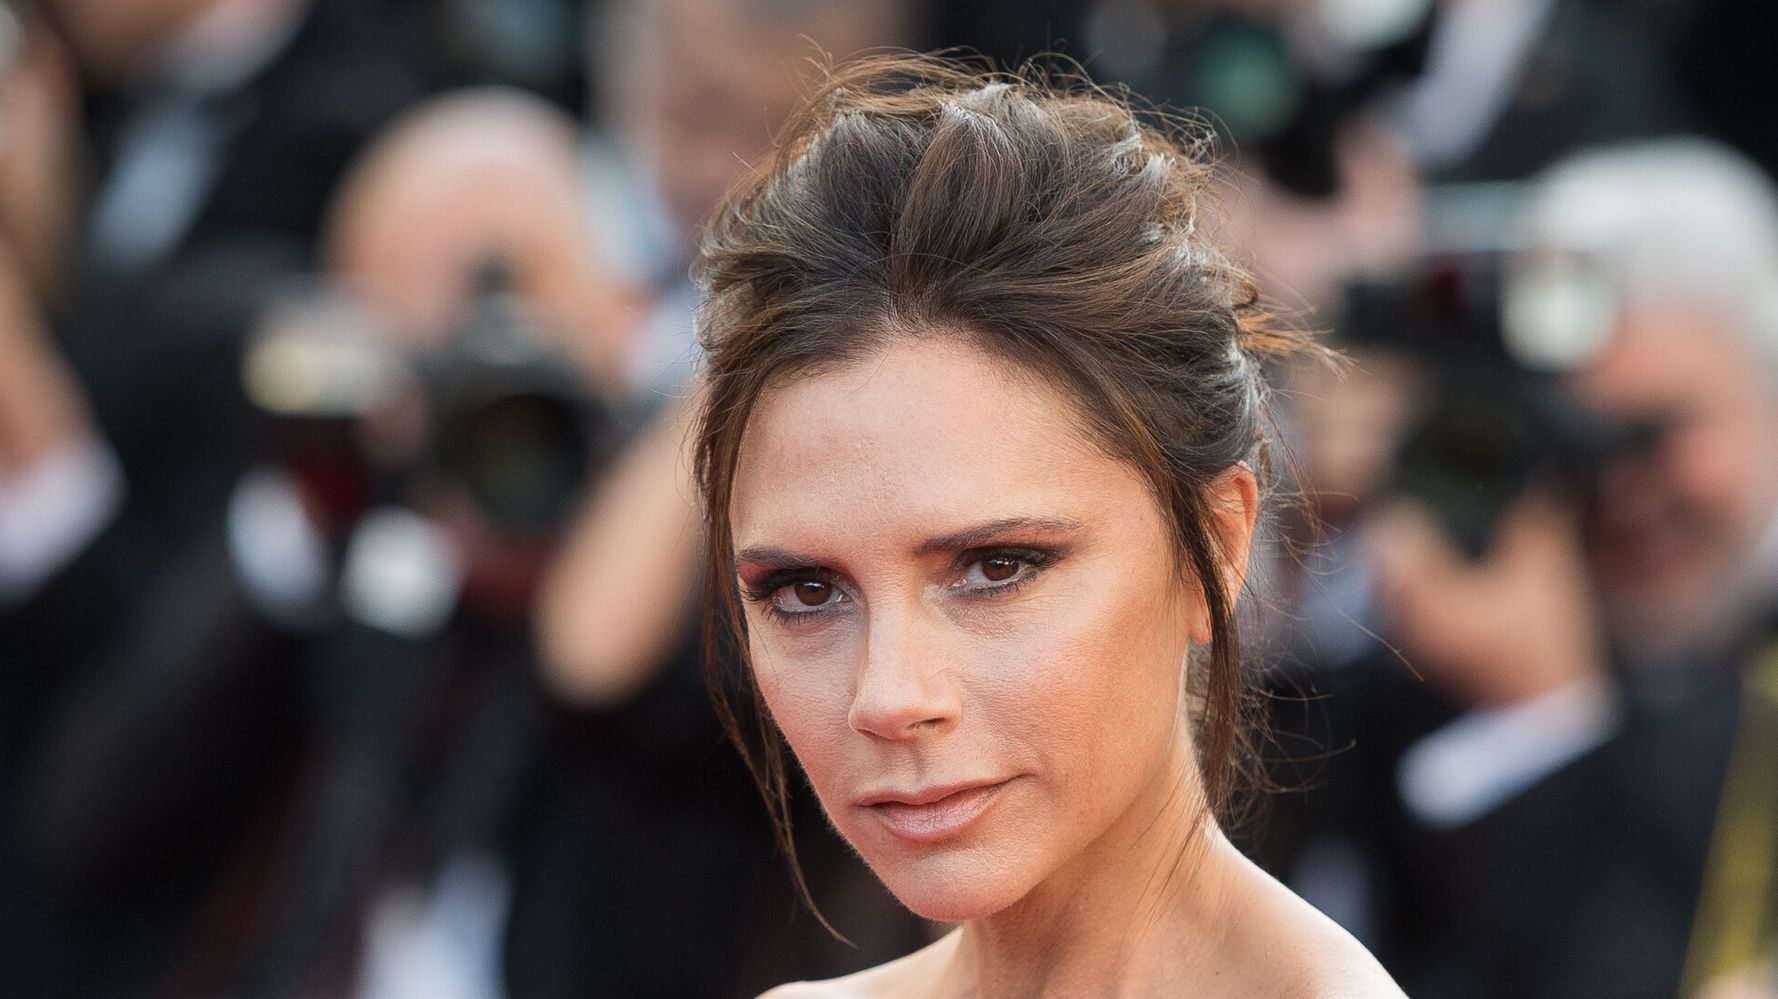 Victoria Beckham On Being Weighed On TV After Birth Of First Child: 'Can You Imagine?'